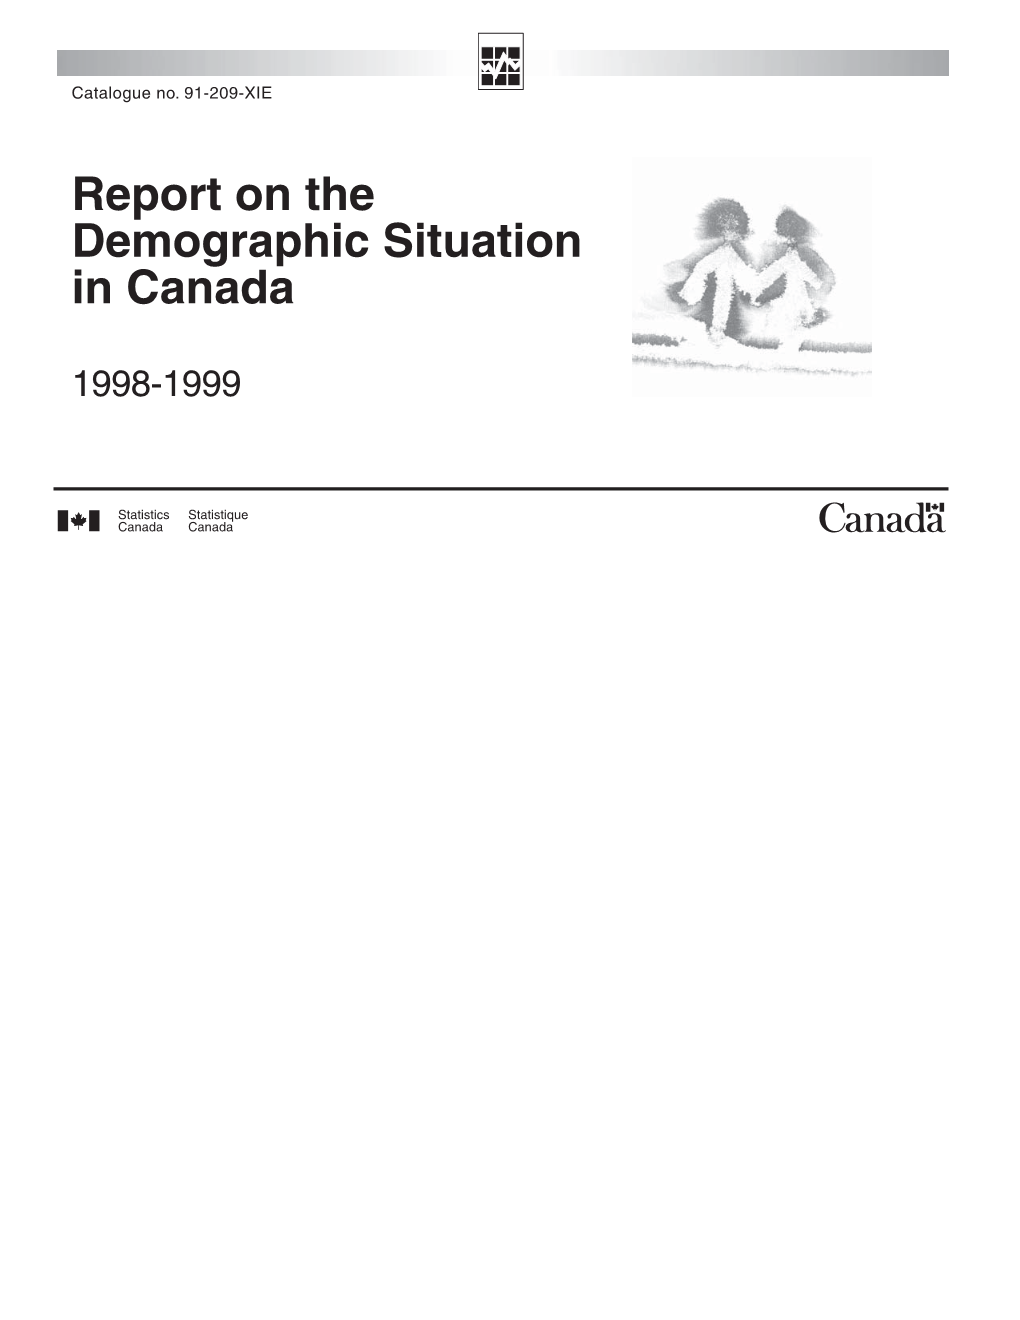 Report on the Demographic Situation in Canada, 1998 and 1999